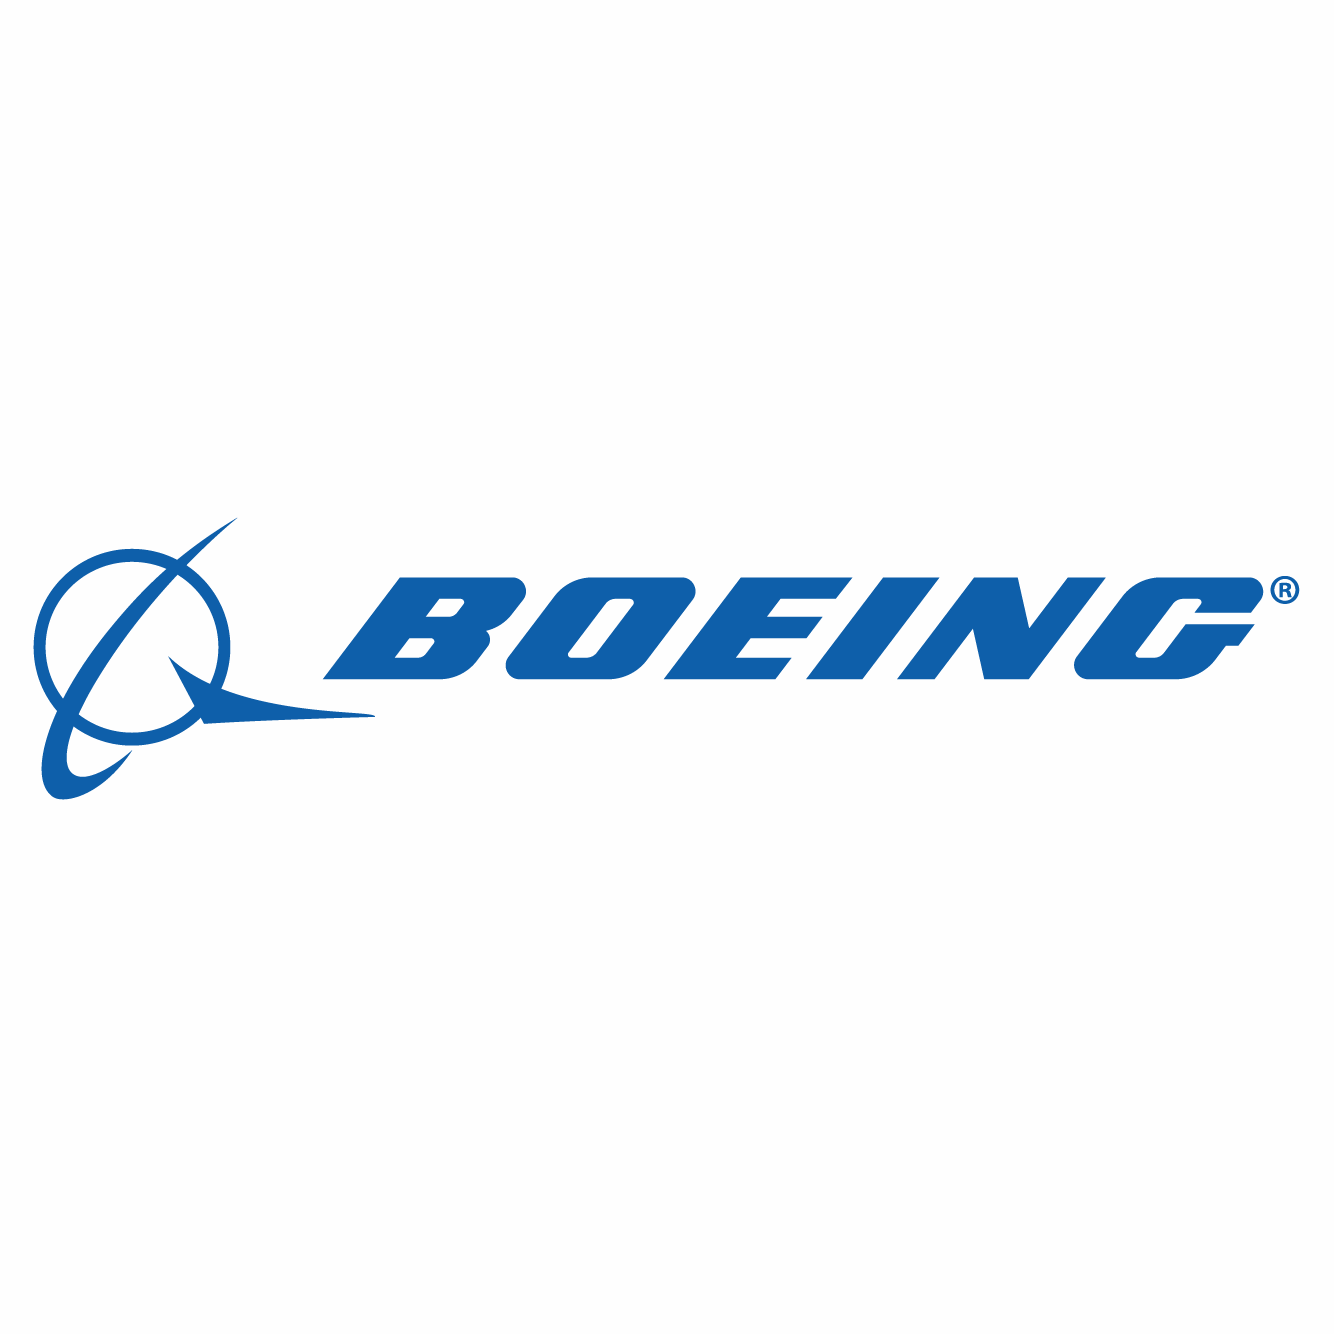 https://securetech.local/wp-content/uploads/2019/02/07.BOEING.png